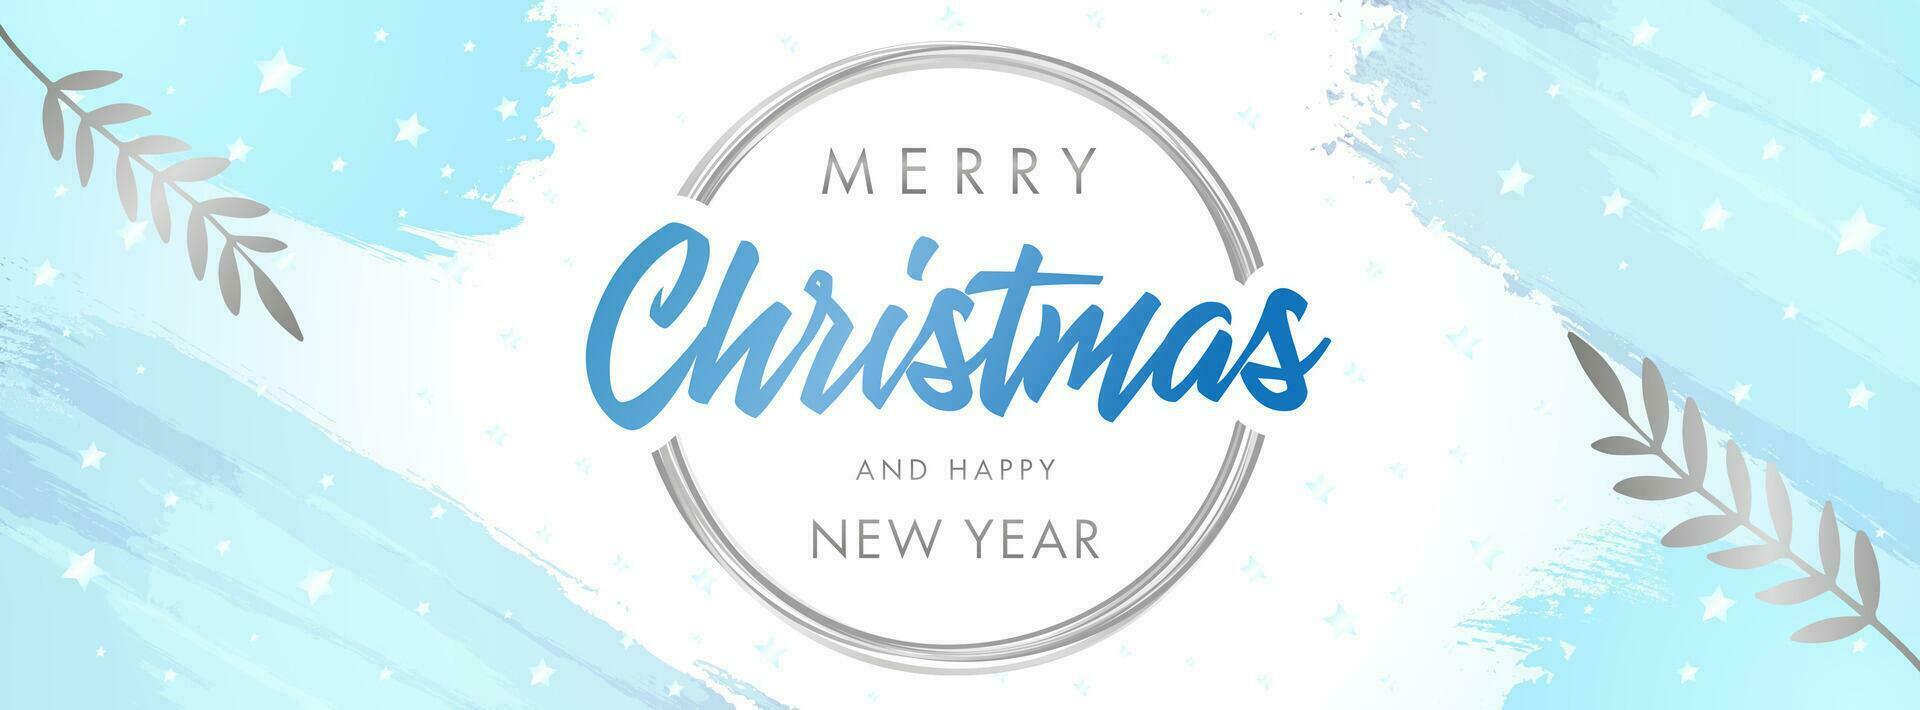 Merry Christmas lettering with silver round frame, leaves and watercolor spots. Happy New Year horizontal banner vector